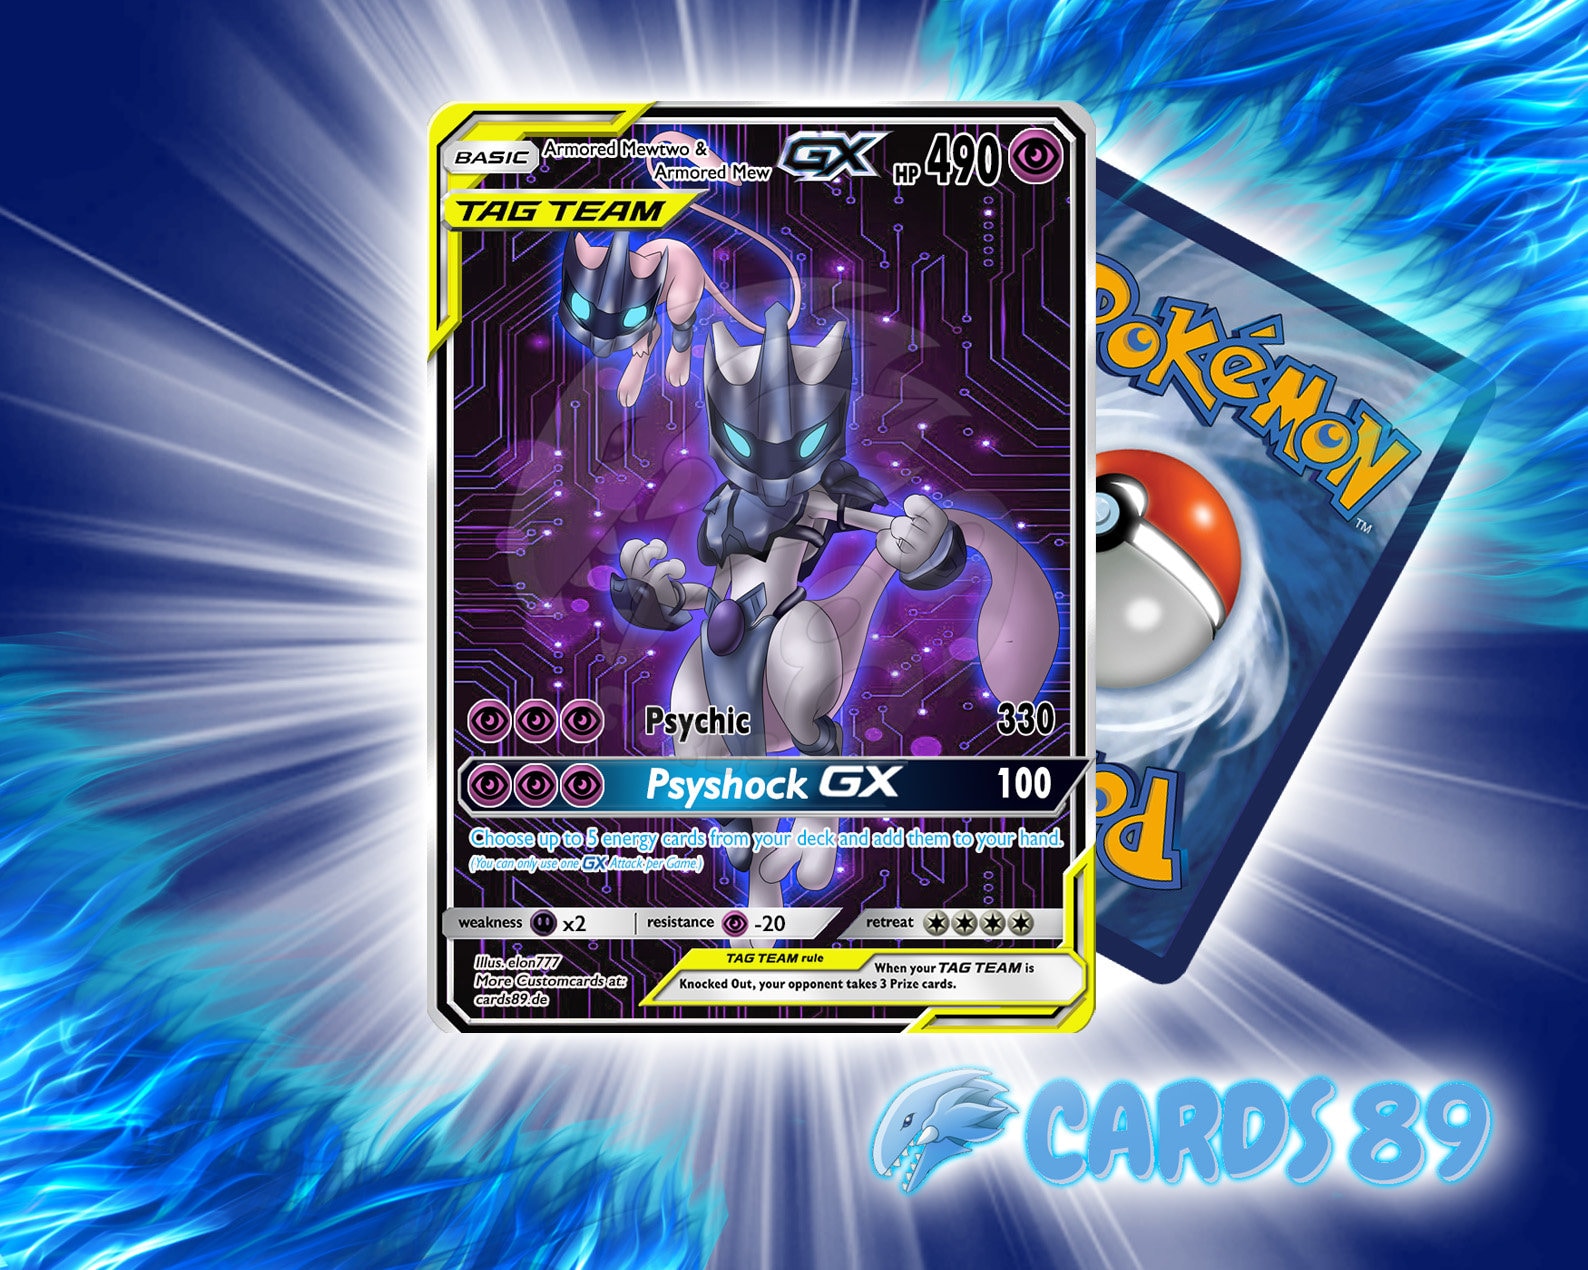 Armored Mewtwo returns to GO, this time with cloned Pokémon as well